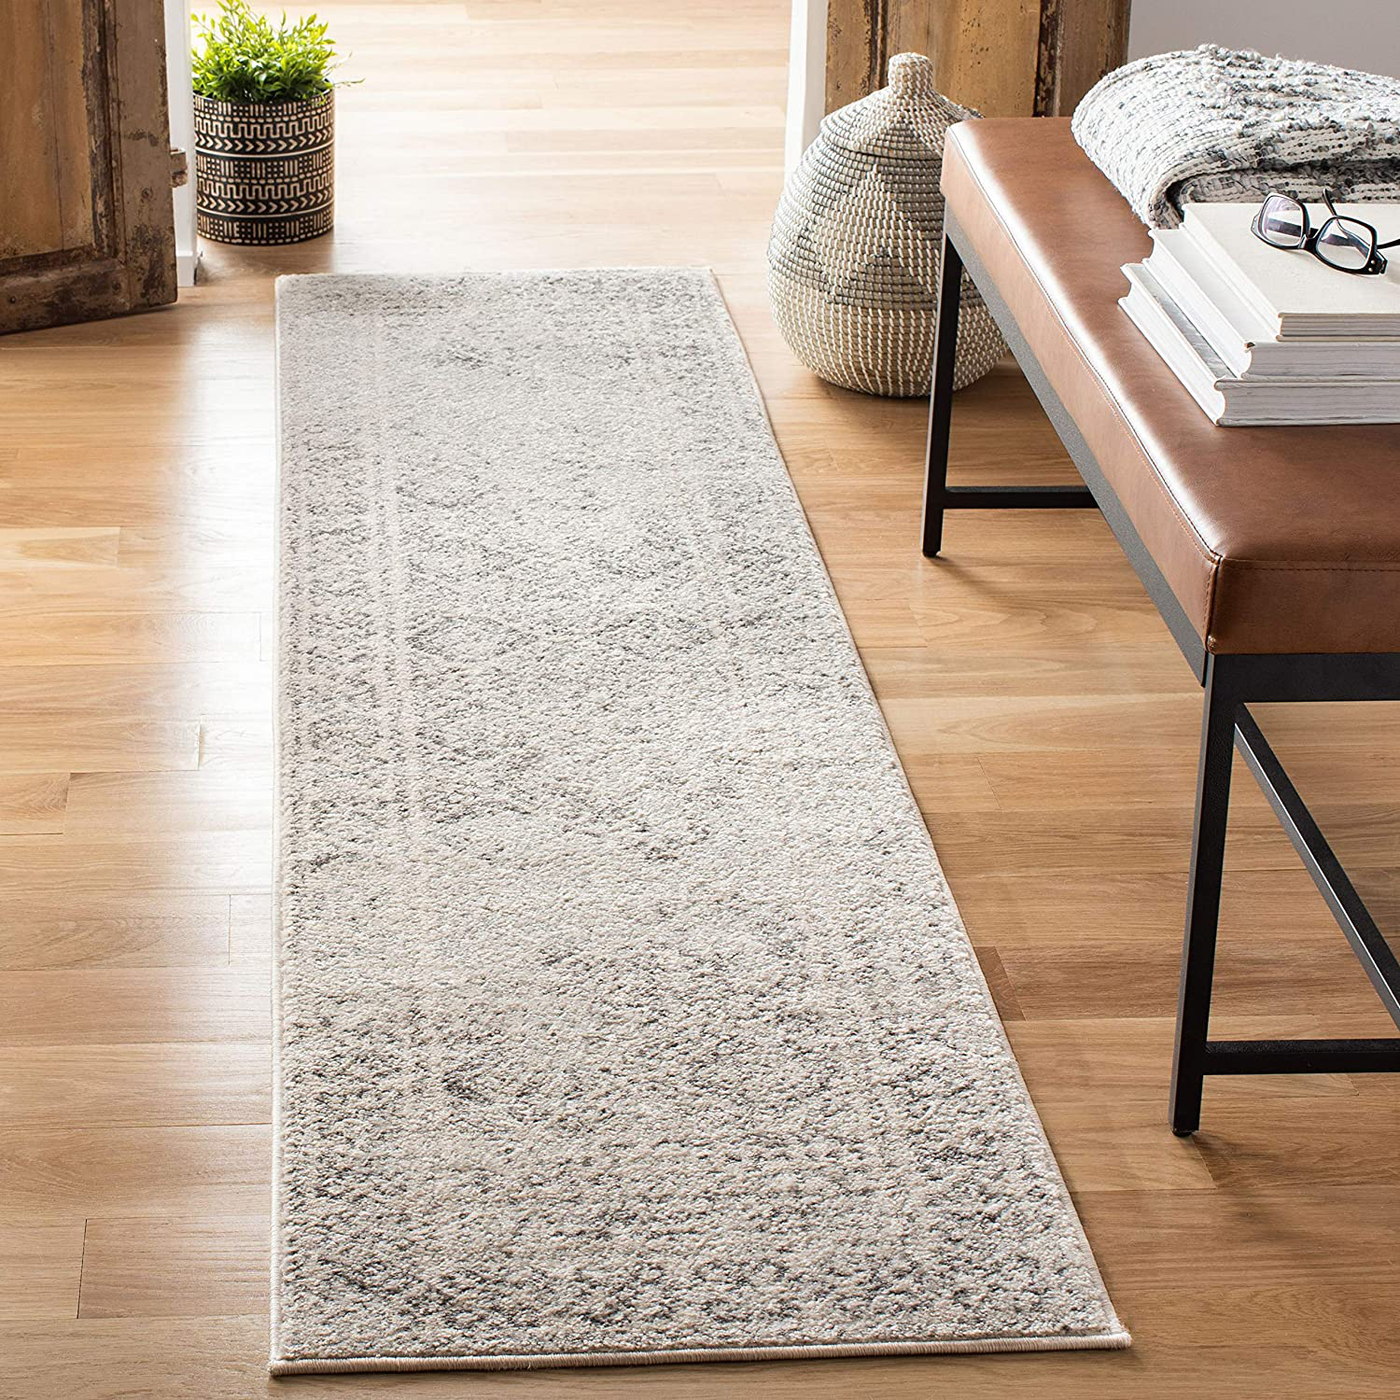 Safavieh Tulum Collection TUL264A Moroccan Boho Distressed Non-Shedding Stain Resistant Living Room Bedroom Runner, 2' x 15' , Ivory / Grey